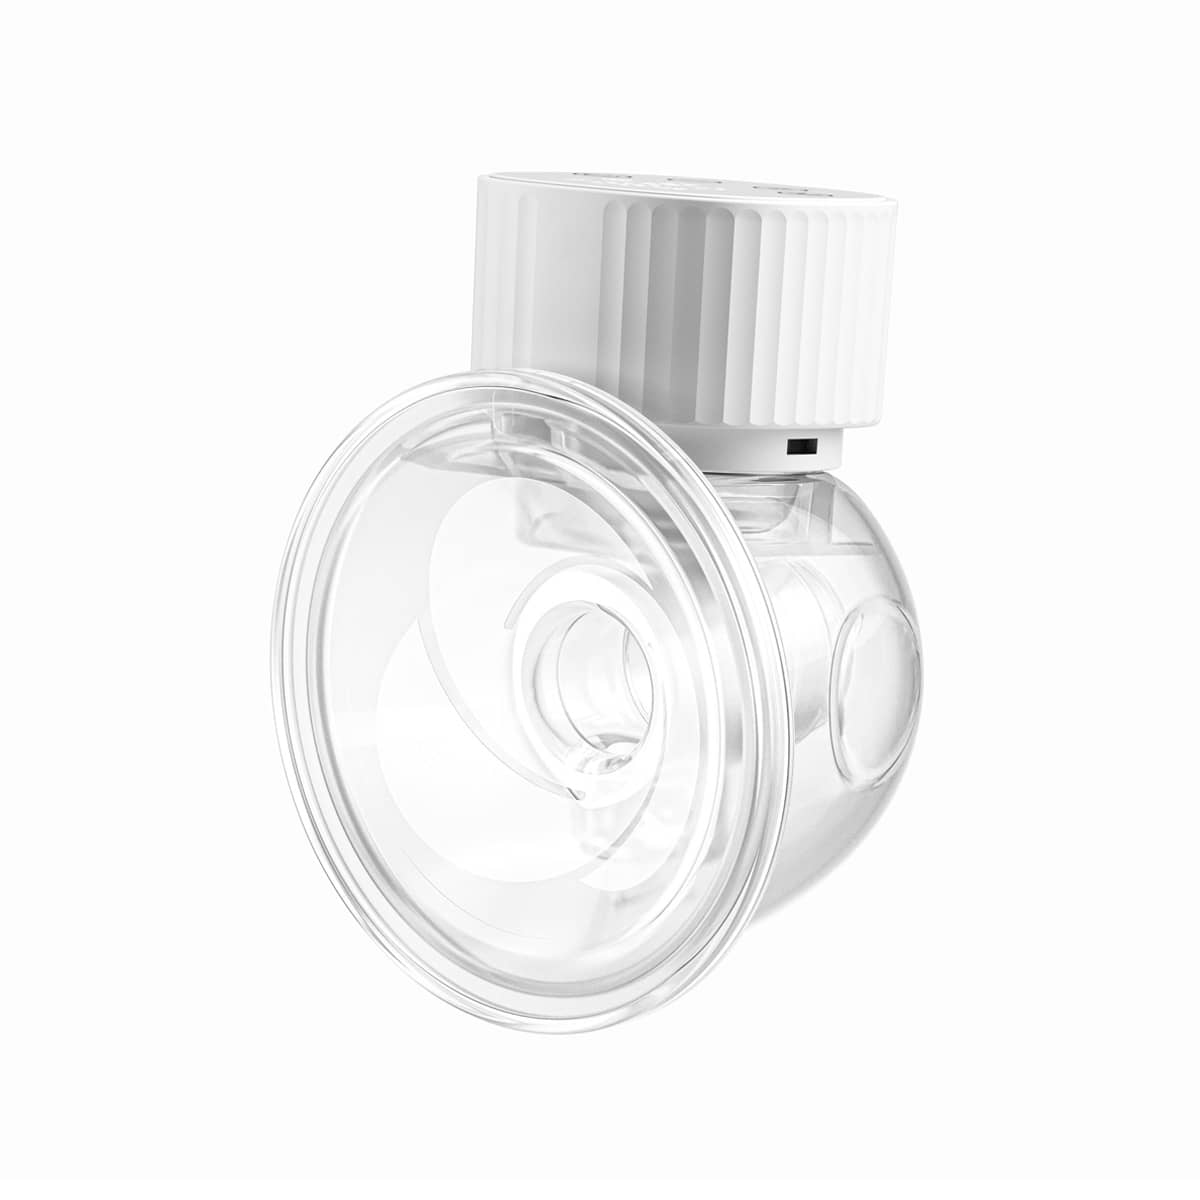 Lactivate ARIA Wearable Breast Pump